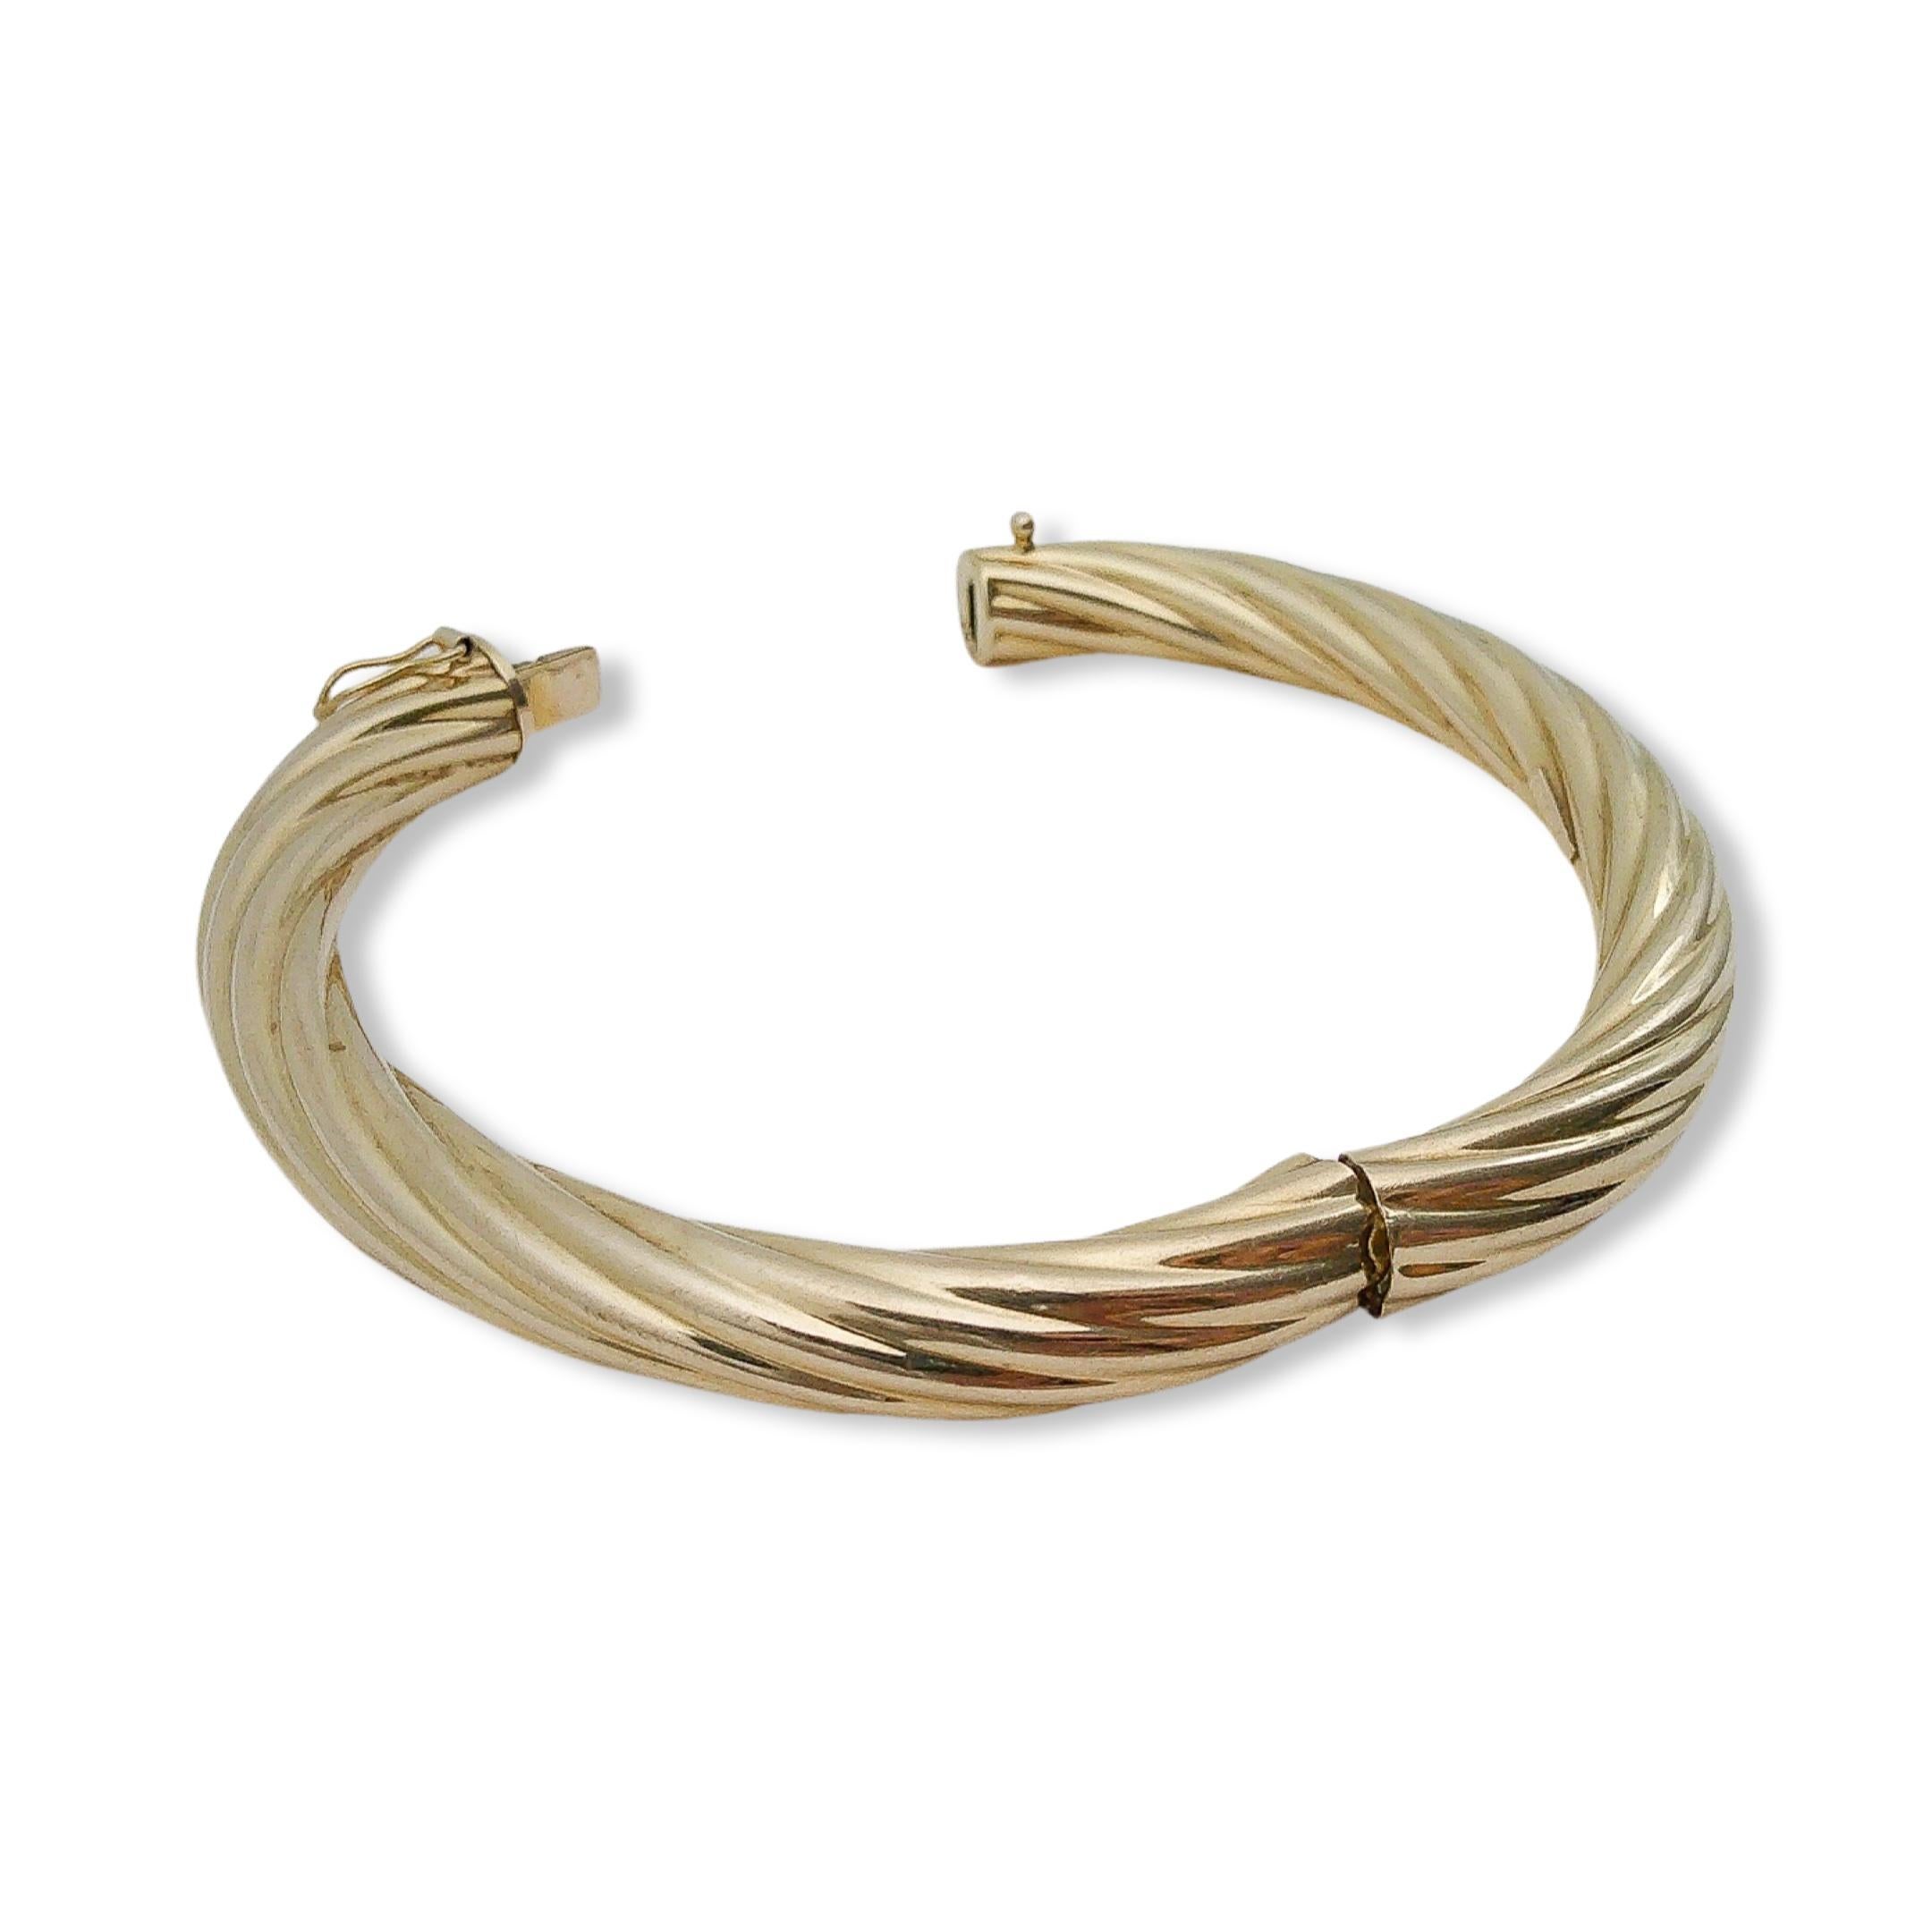 Step into a radiant dance between past and present, where elegance wraps delicately around your wrist in a single, fluid motion. Inspired by the timeless allure of retro aesthetics, this bangle boasts a whimsical twist, spiraling with impeccable